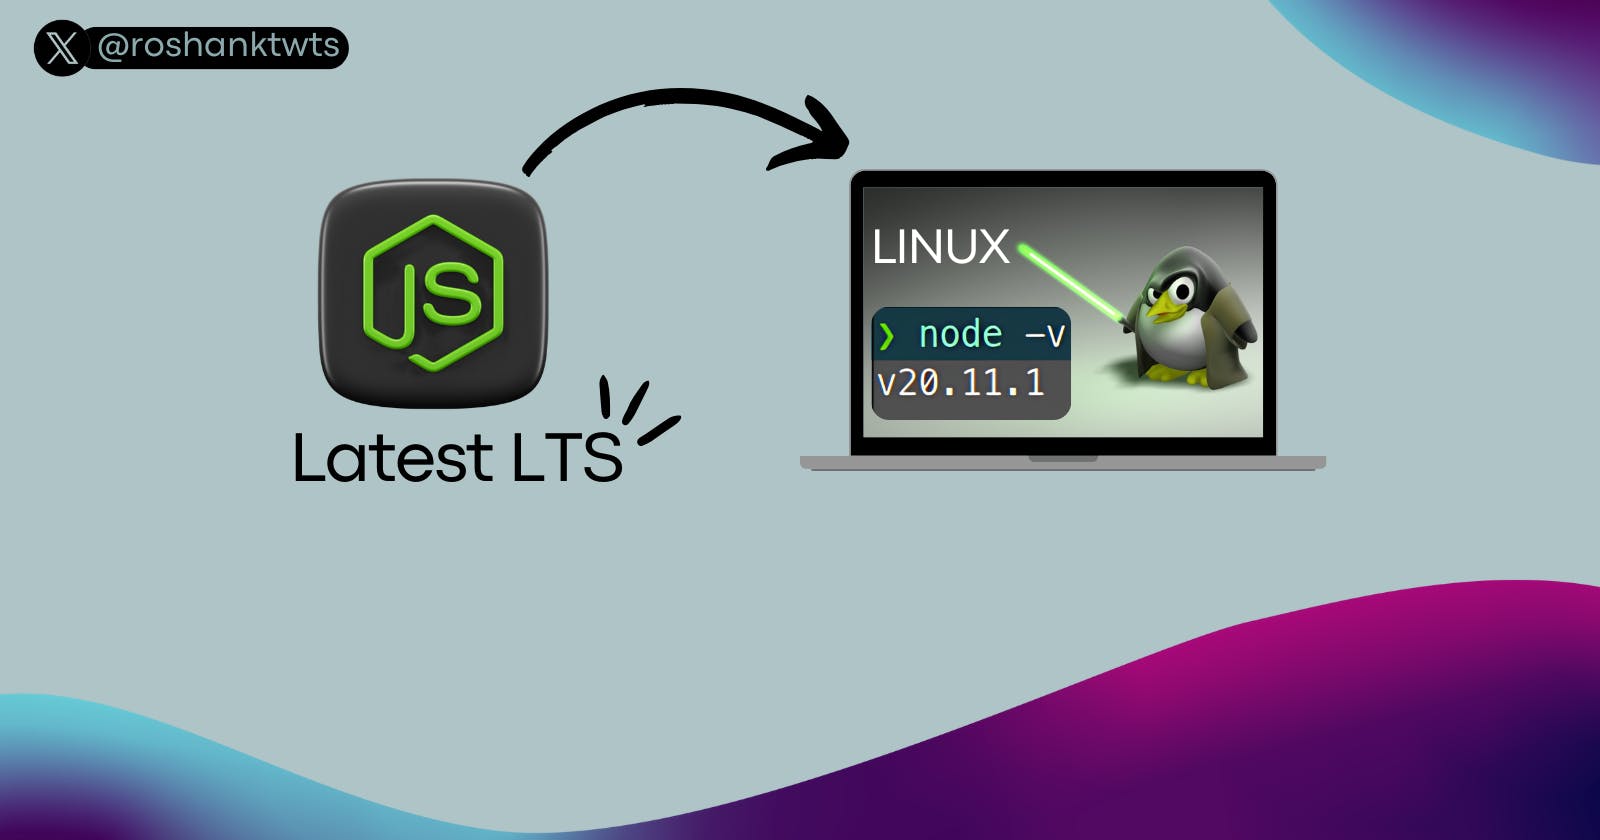 How to install the latest LTS version of "NodeJS" in "LINUX"?